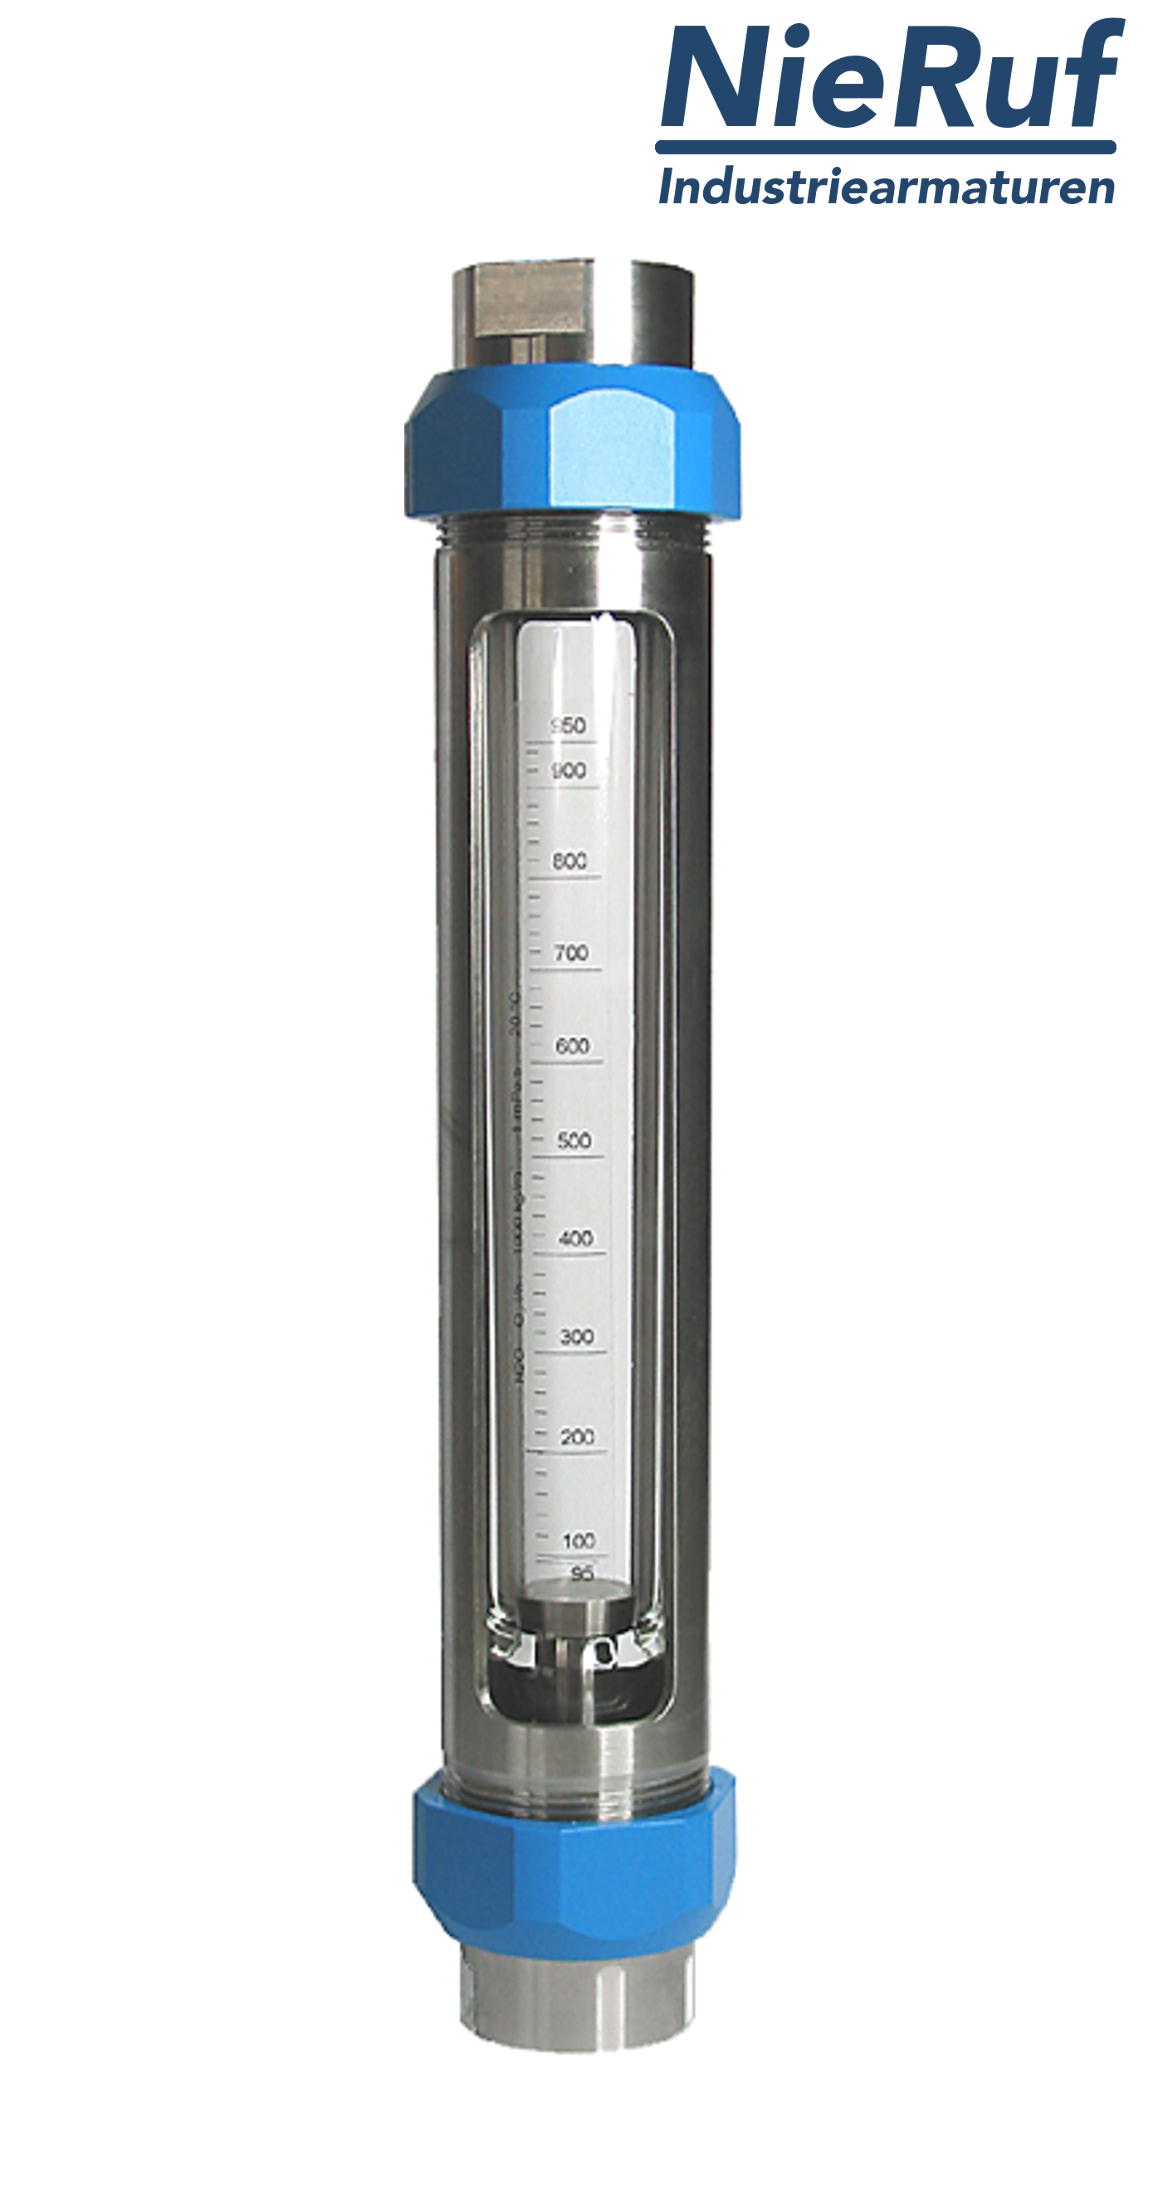 Variable area flowmeter stainless steel + borosilicate 1/2" inch 110.0 - 1100.0 l/h air EPDM